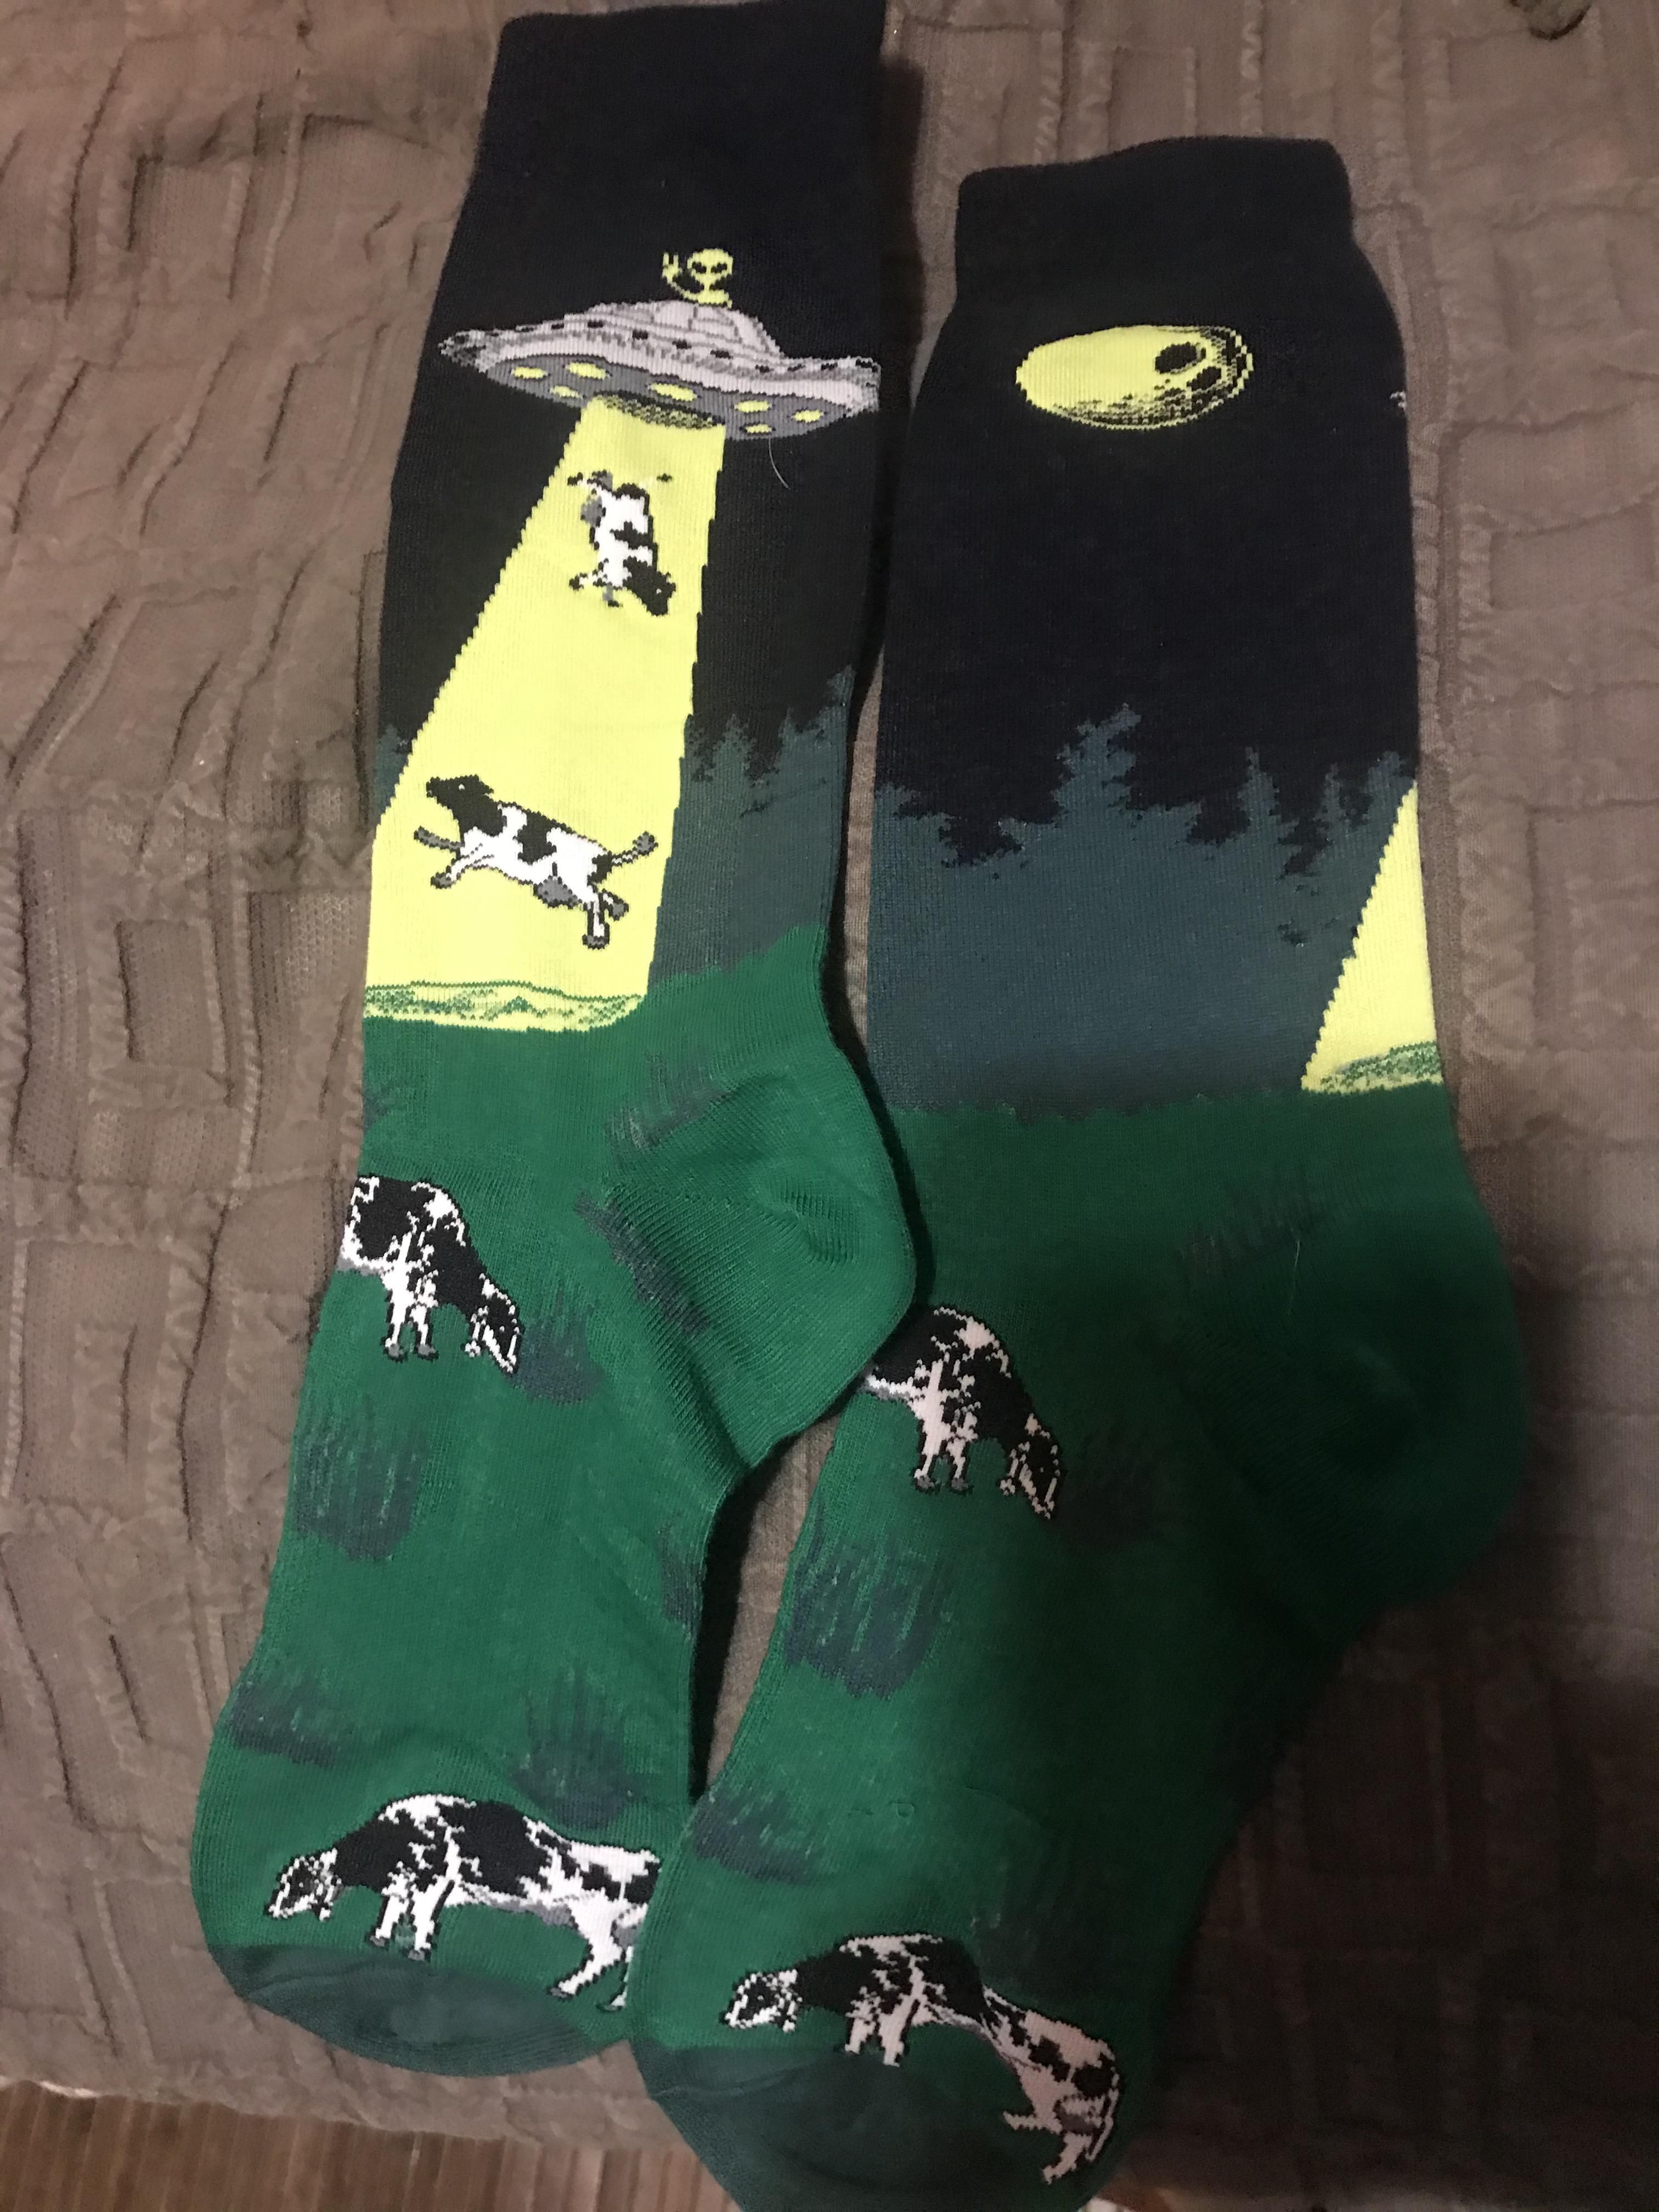 My wife got me these. Best socks ever.